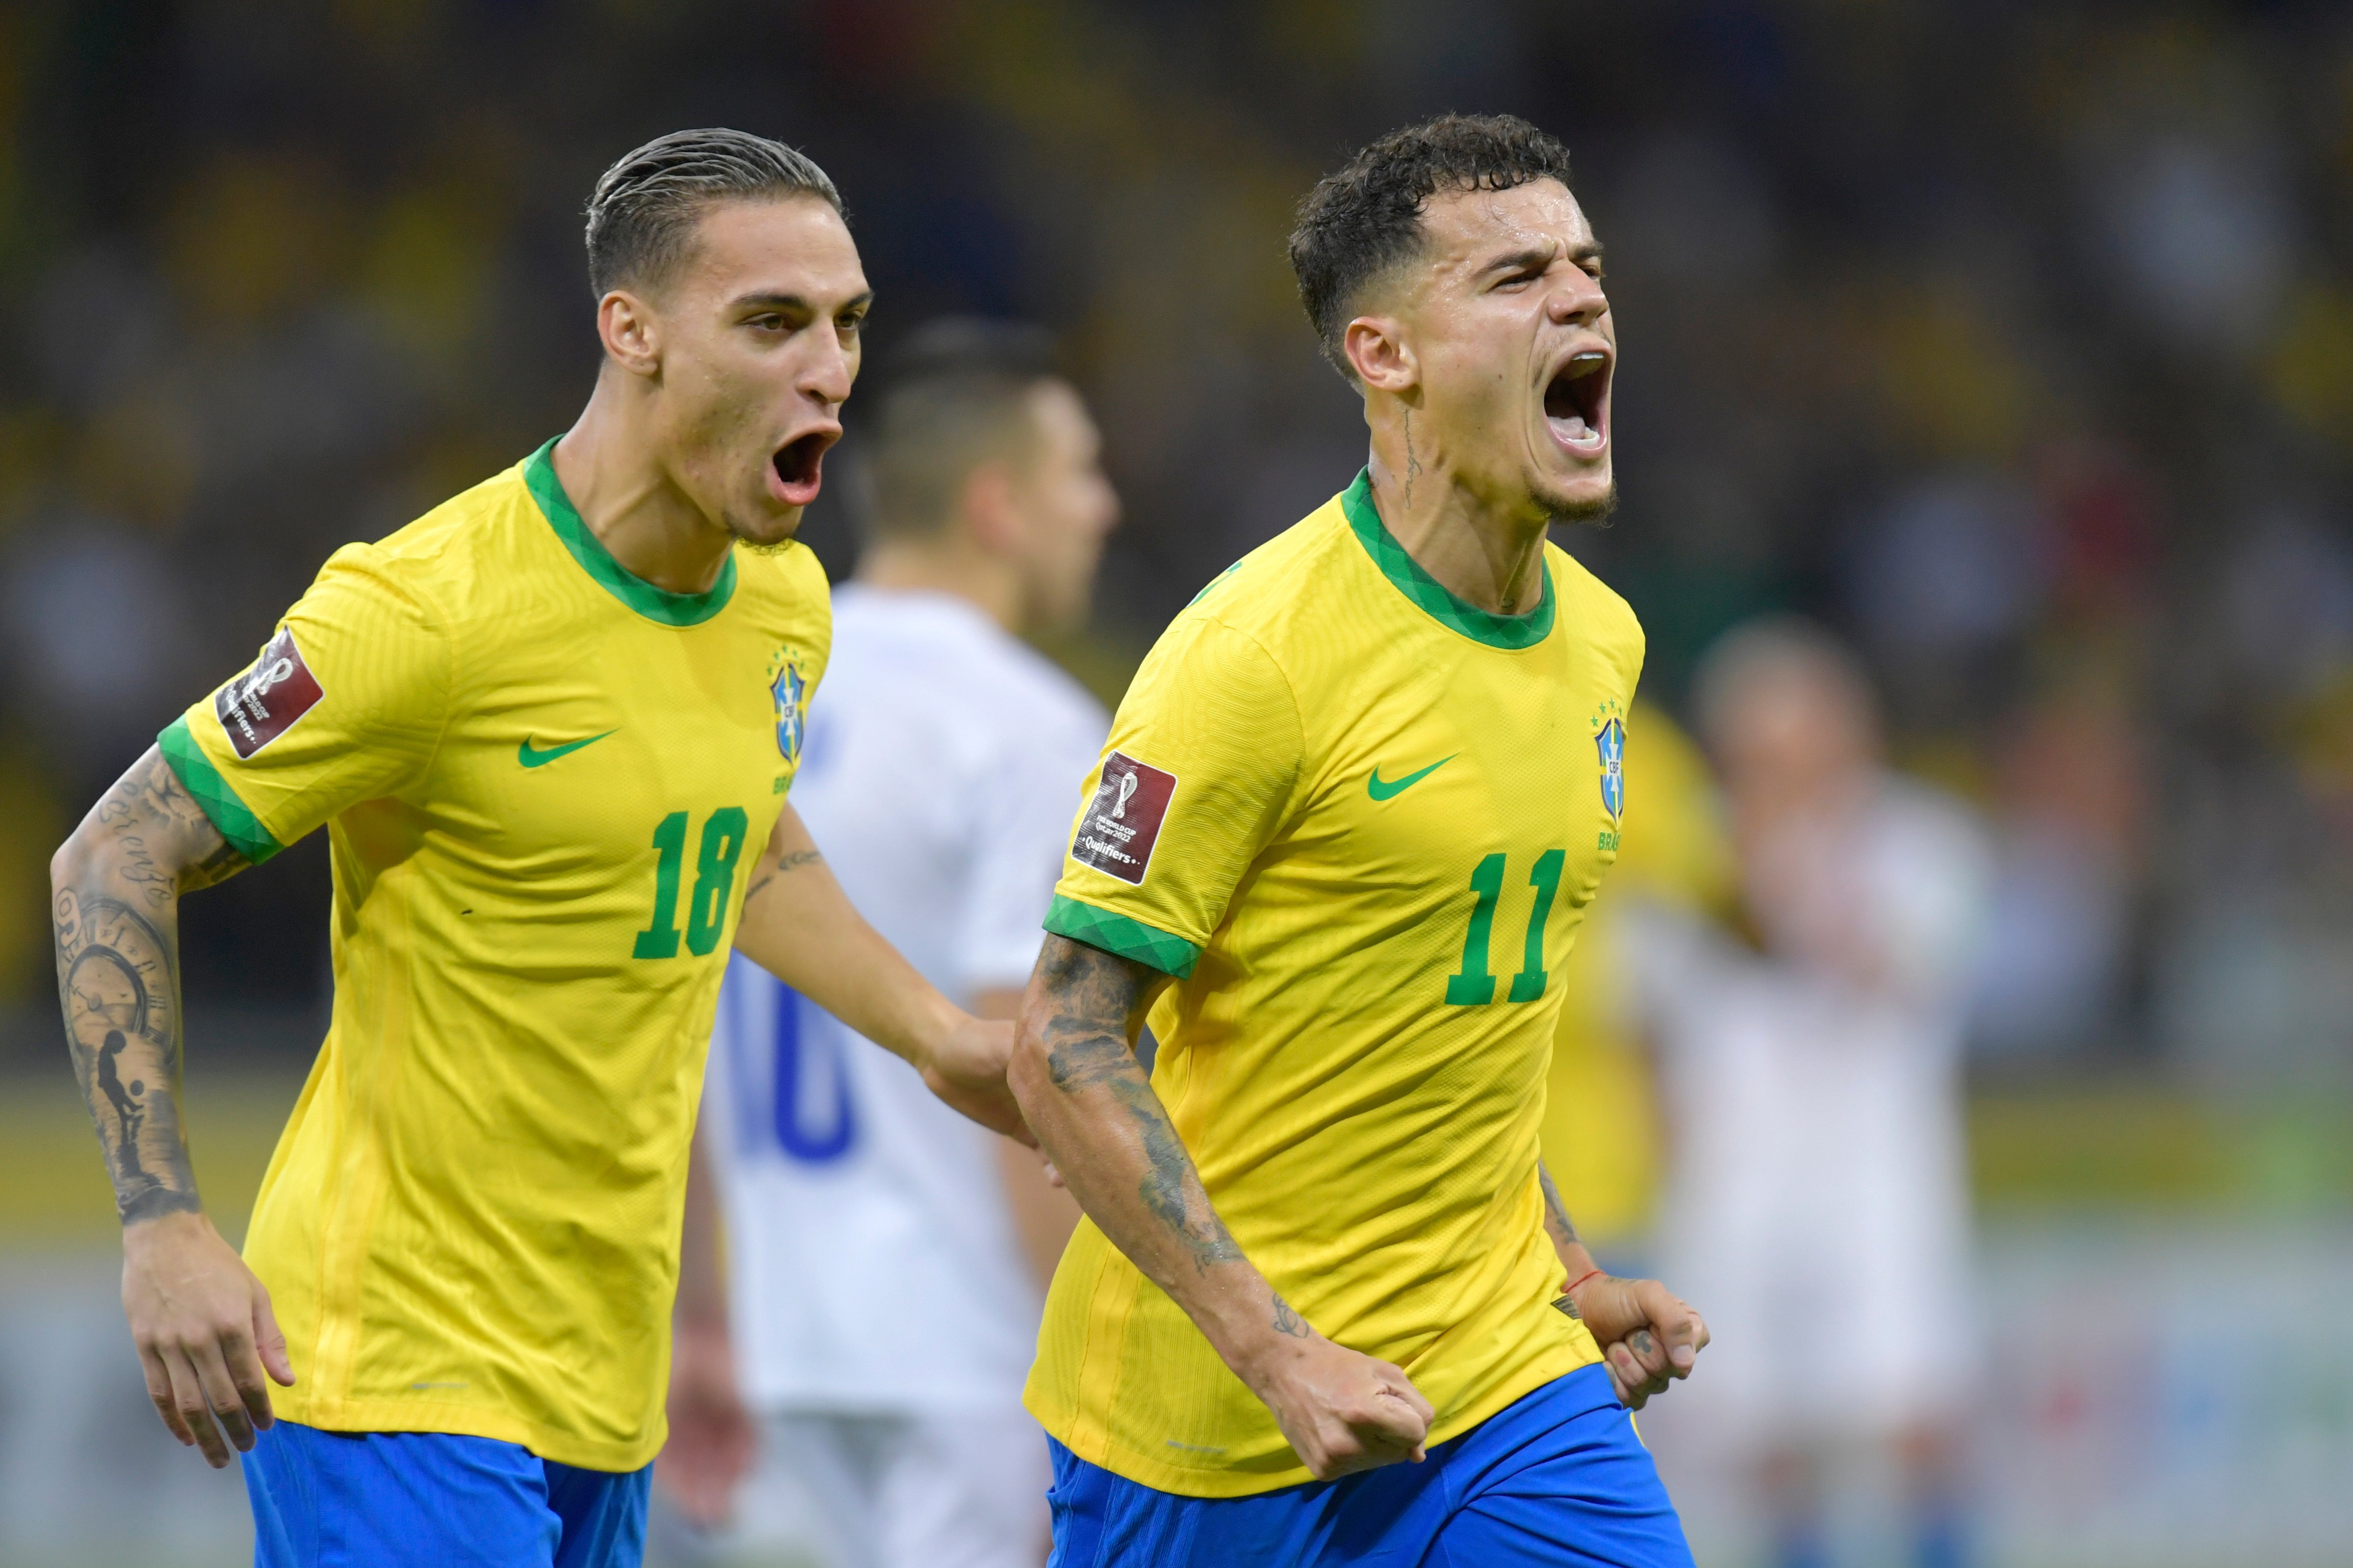 Philippe Coutinho is likely to start for Brazil